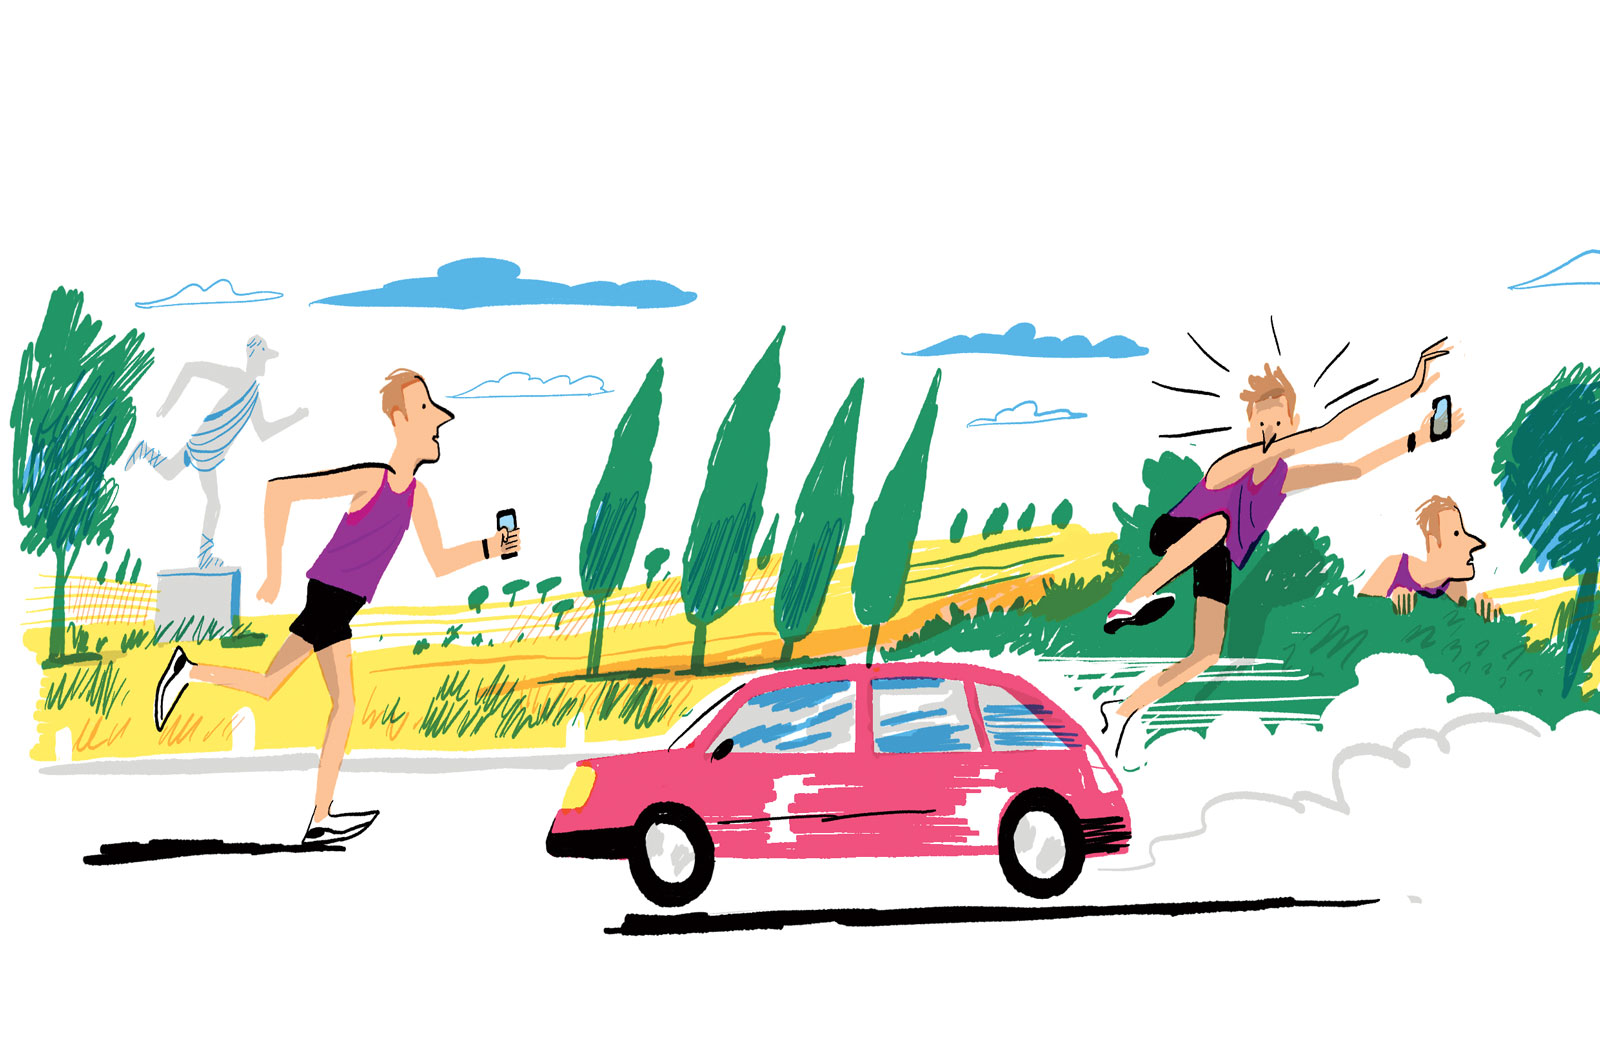 An illustration depicting a running man jumping out of the way of a car.